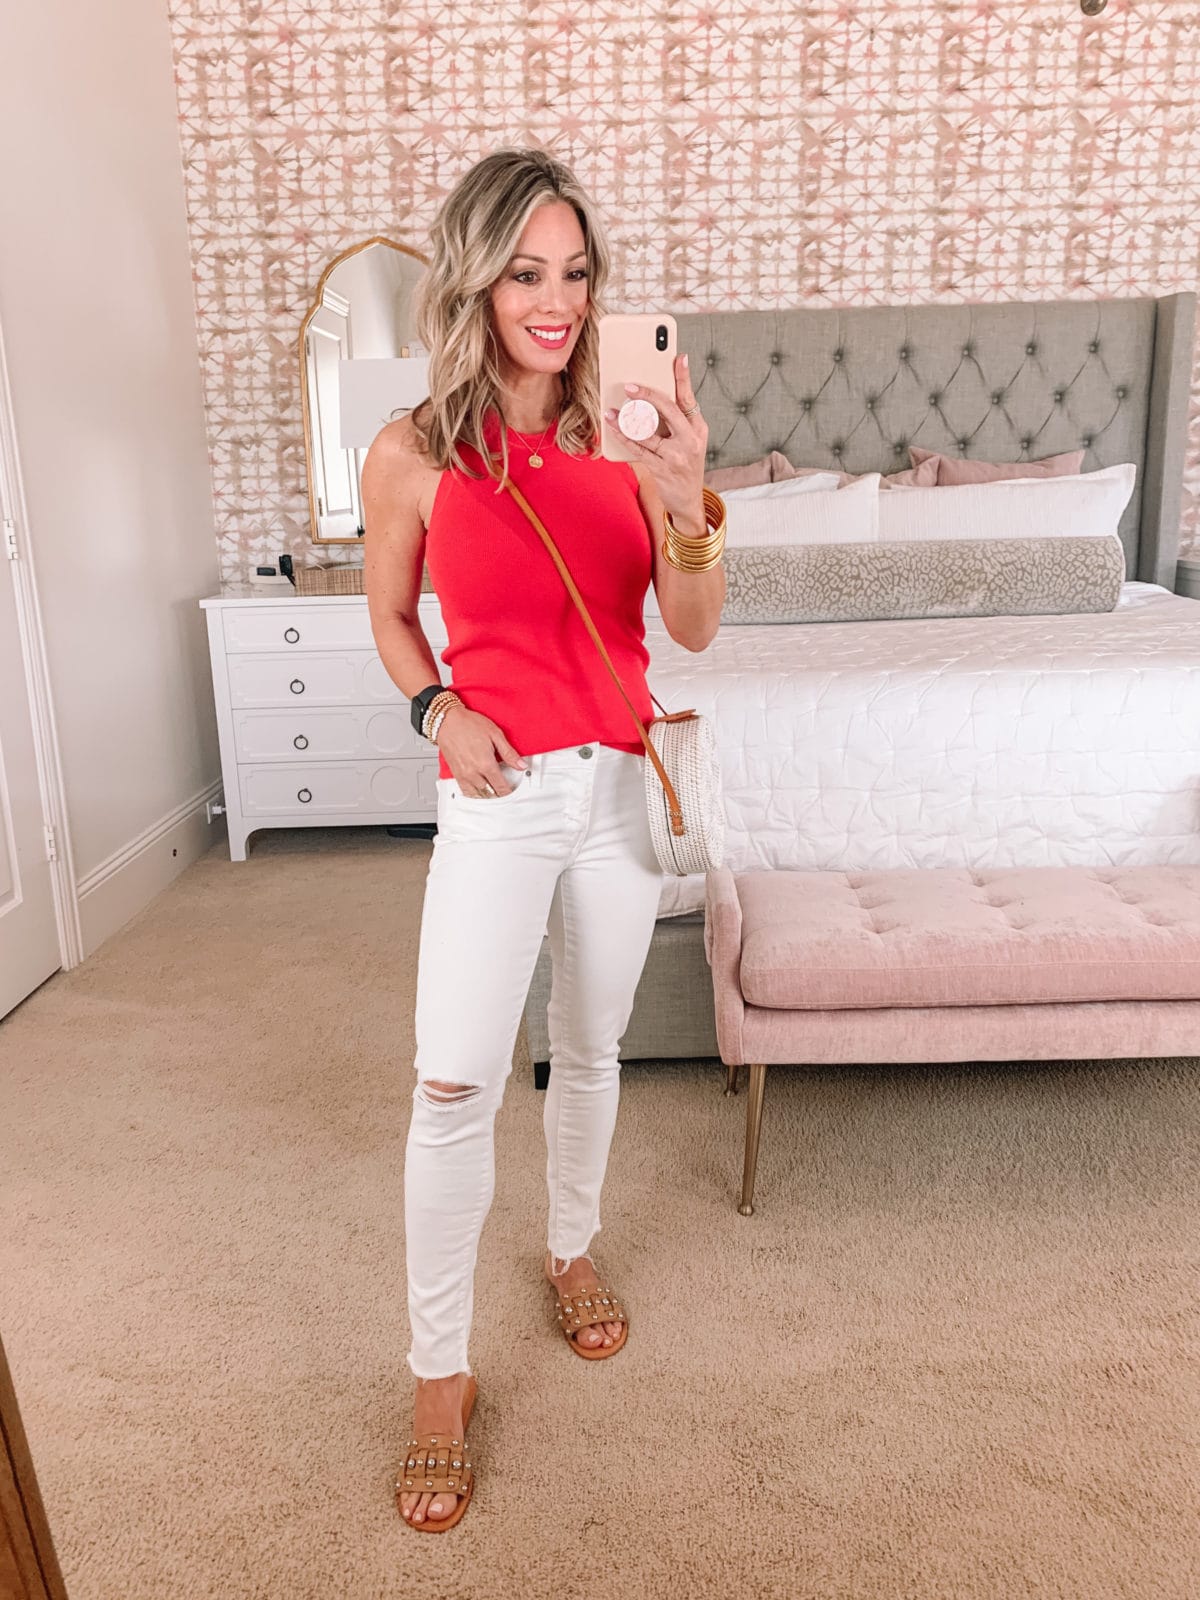 Amazon Fashion Faves, Tank, White Jeans, Sandals, Bamboo clutch